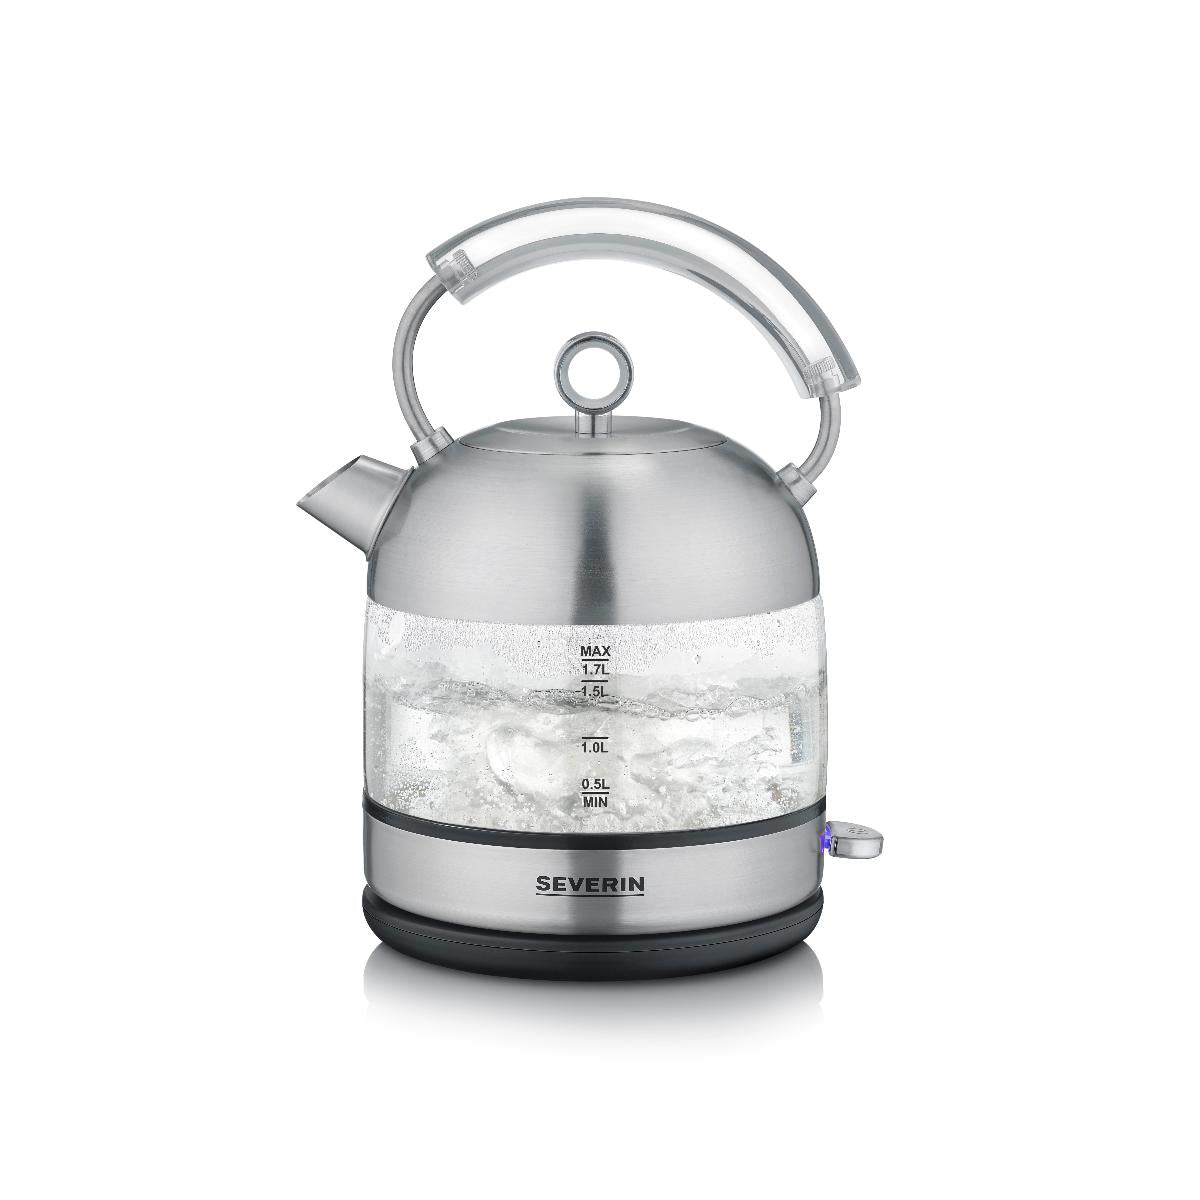 WK 3454/Severin Retro glass kettle| Color: glass | Capacity (Ltr): 1.7| Watt: 2400| Safety System: y 2400 / 1.7 L / glass